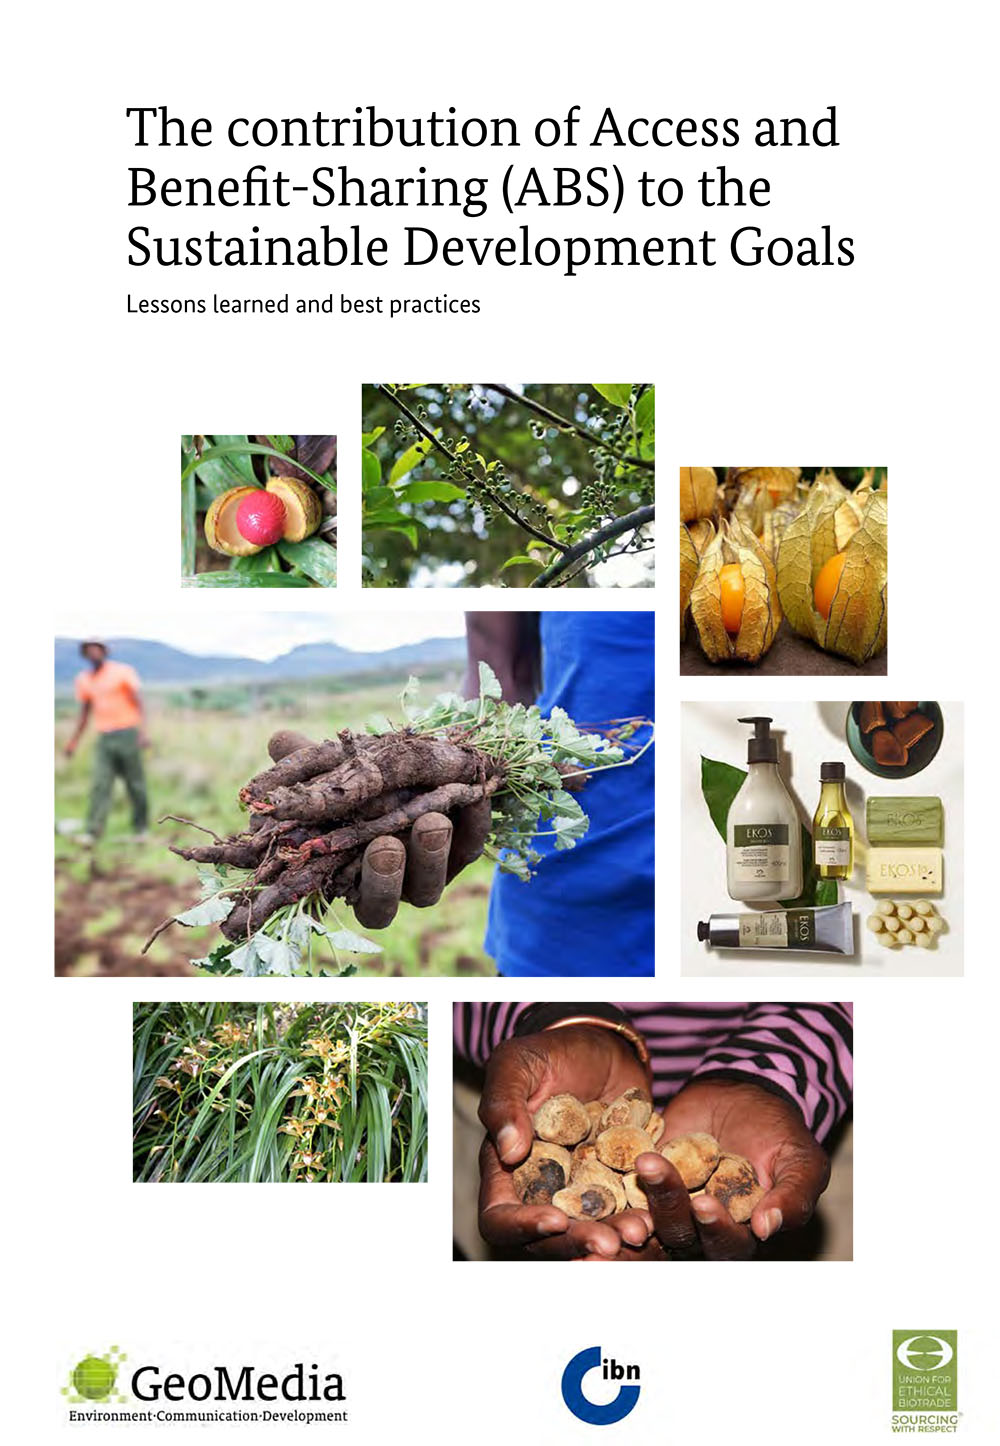 Compendium - The contribution of Access and Benefit-Sharing (ABS) to the Sustainable Development Goals - Lessons learned and best practices